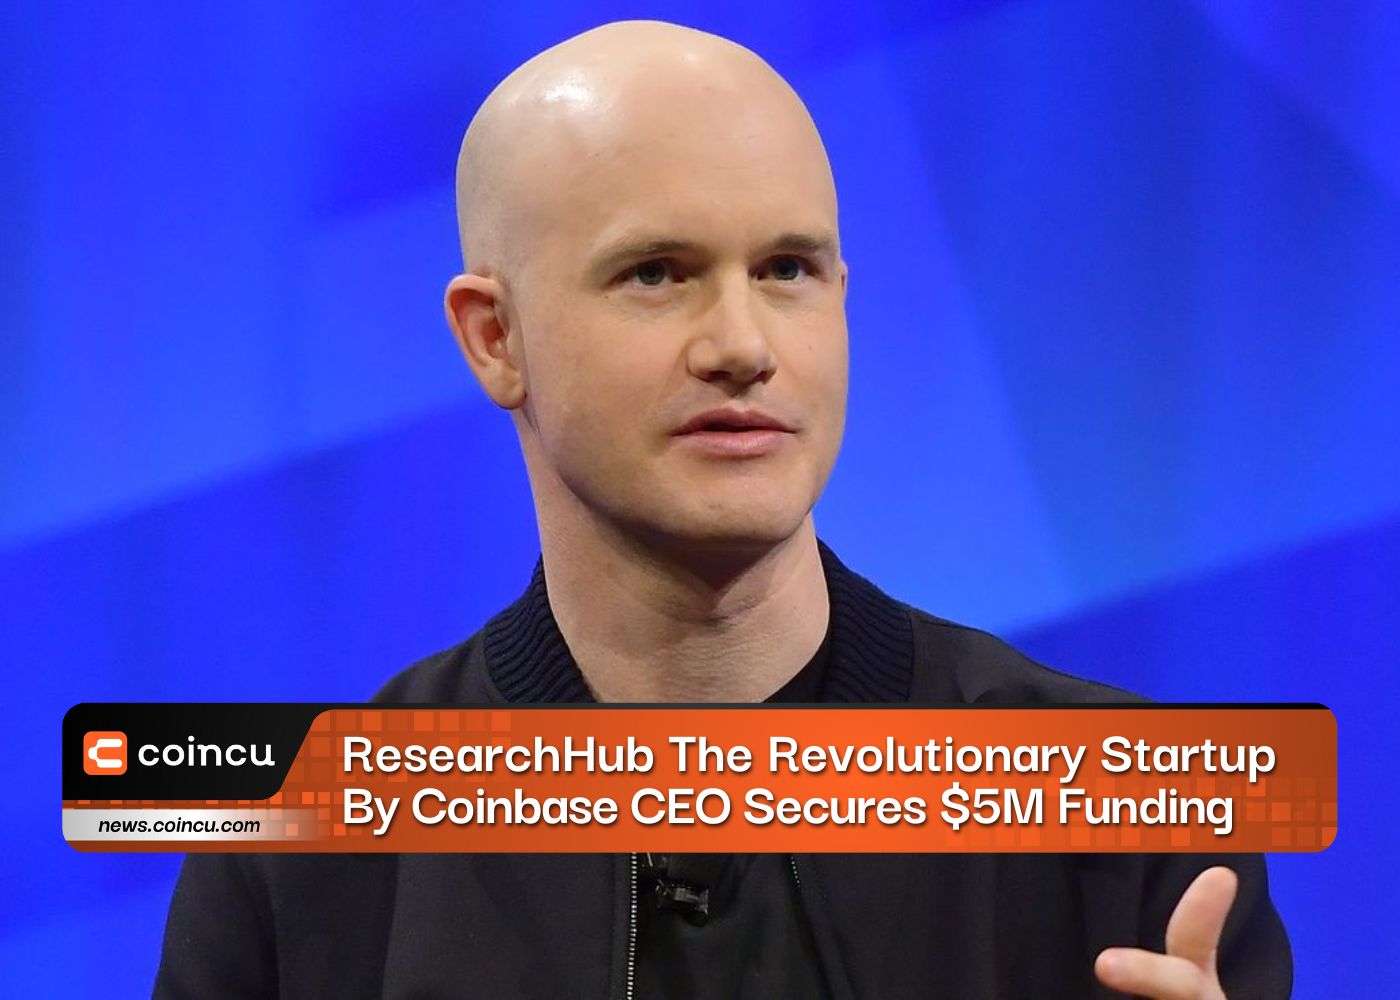 ResearchHub The Revolutionary Startup By Coinbase CEO Secures $5M Funding